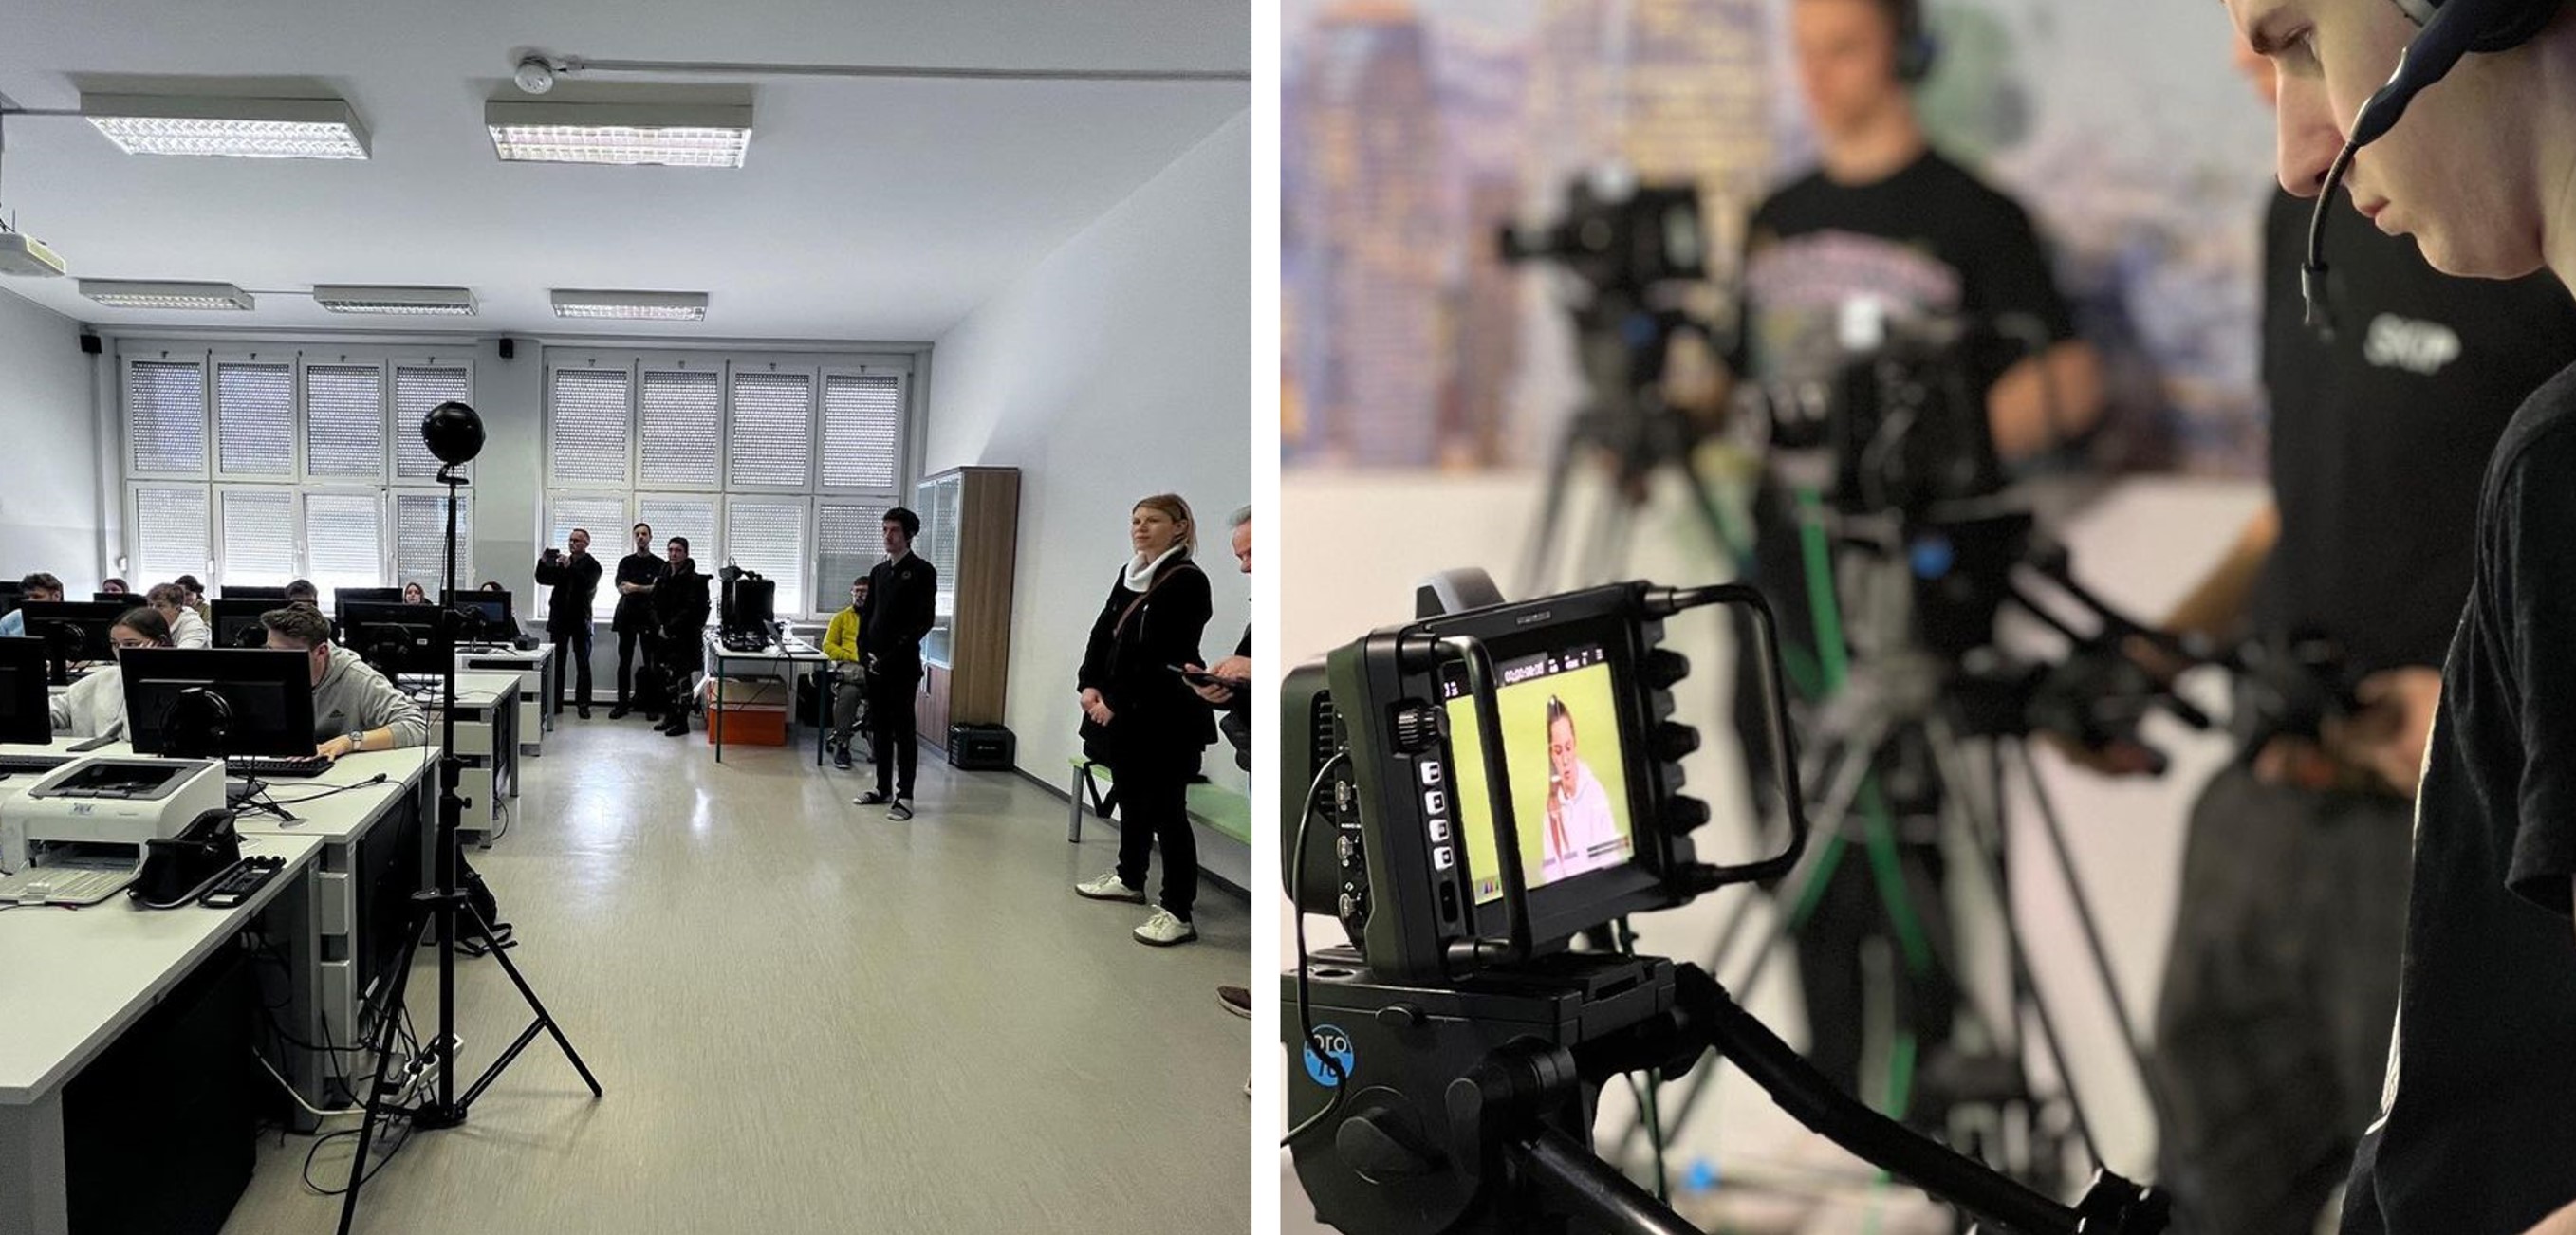 The picture on the left shows students at their desks with computers in a large, bright classroom, with a few people standing against the wall, watching them. On the right is a team of cameramen behind the cameras.